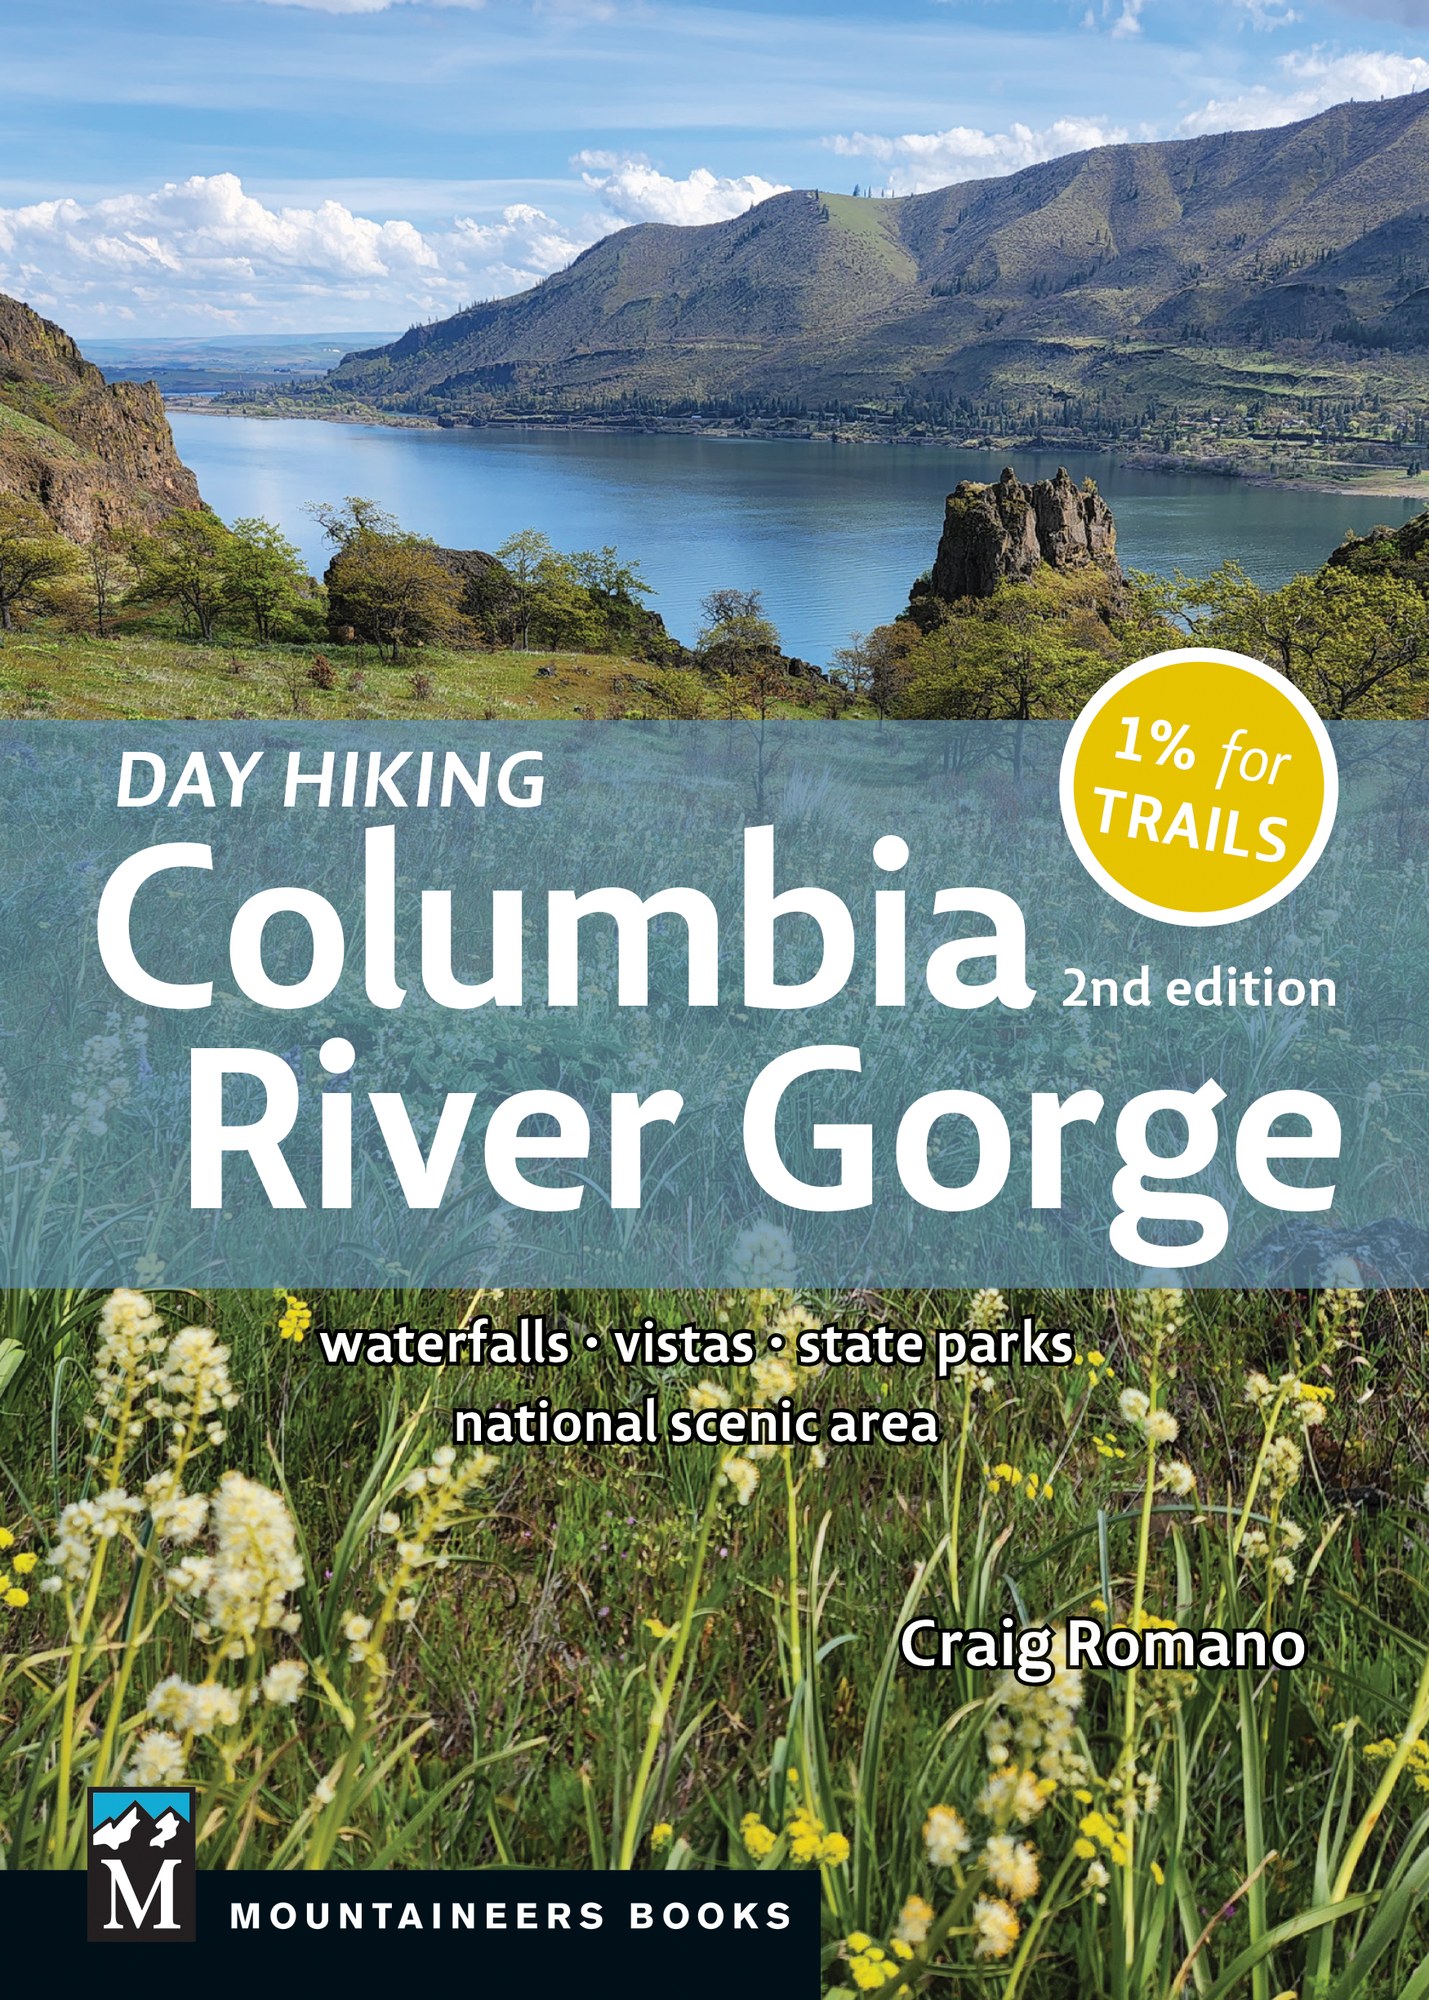 Day-Trip: Mt. Hood and The Columbia River Gorge - The Independence